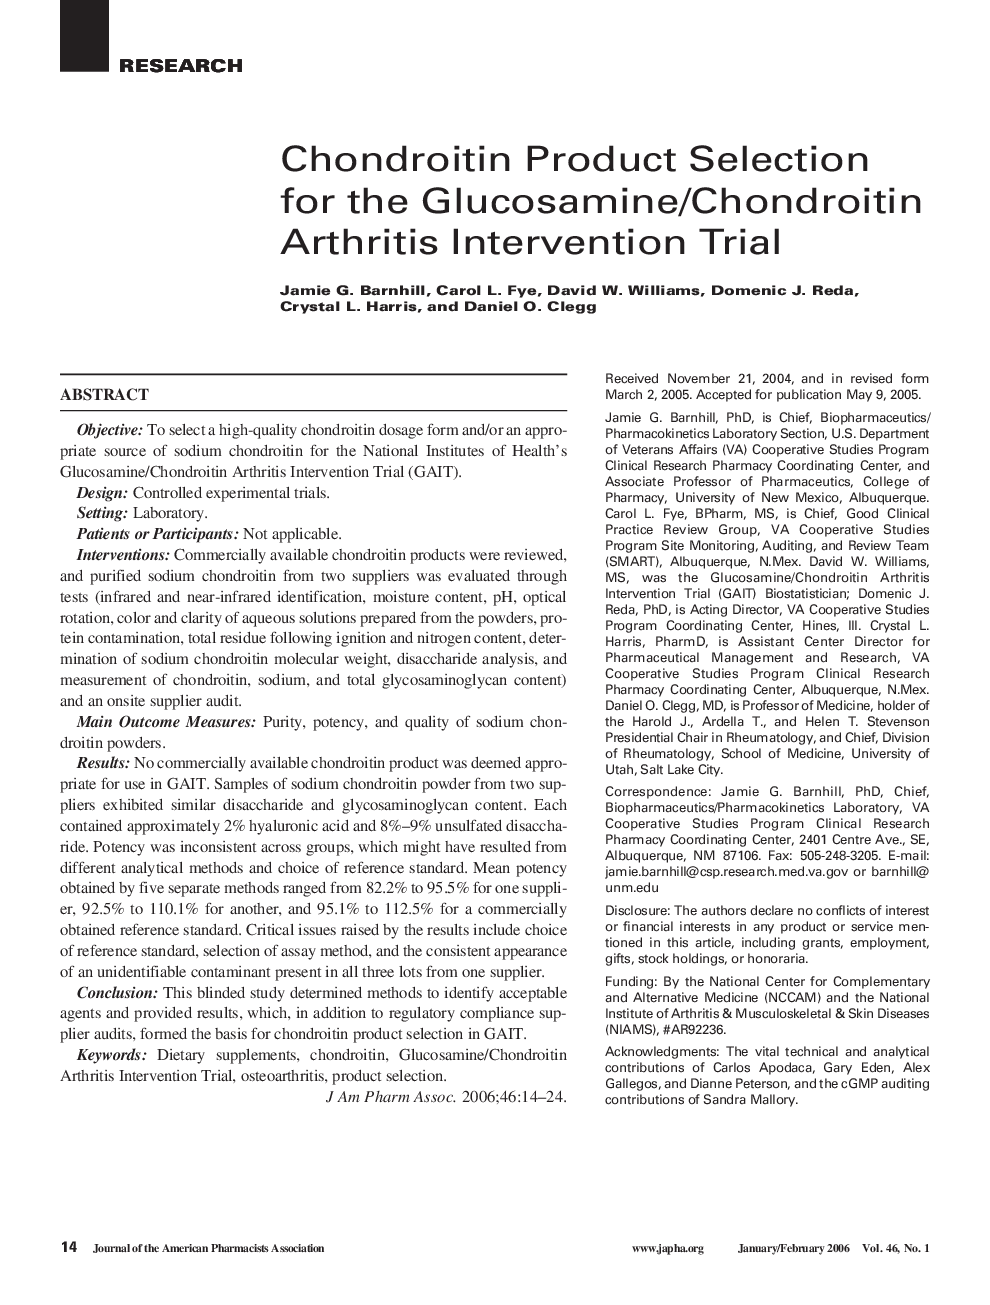 Chondroitin Product Selection for the Glucosamine/Chondroitin Arthritis Intervention Trial